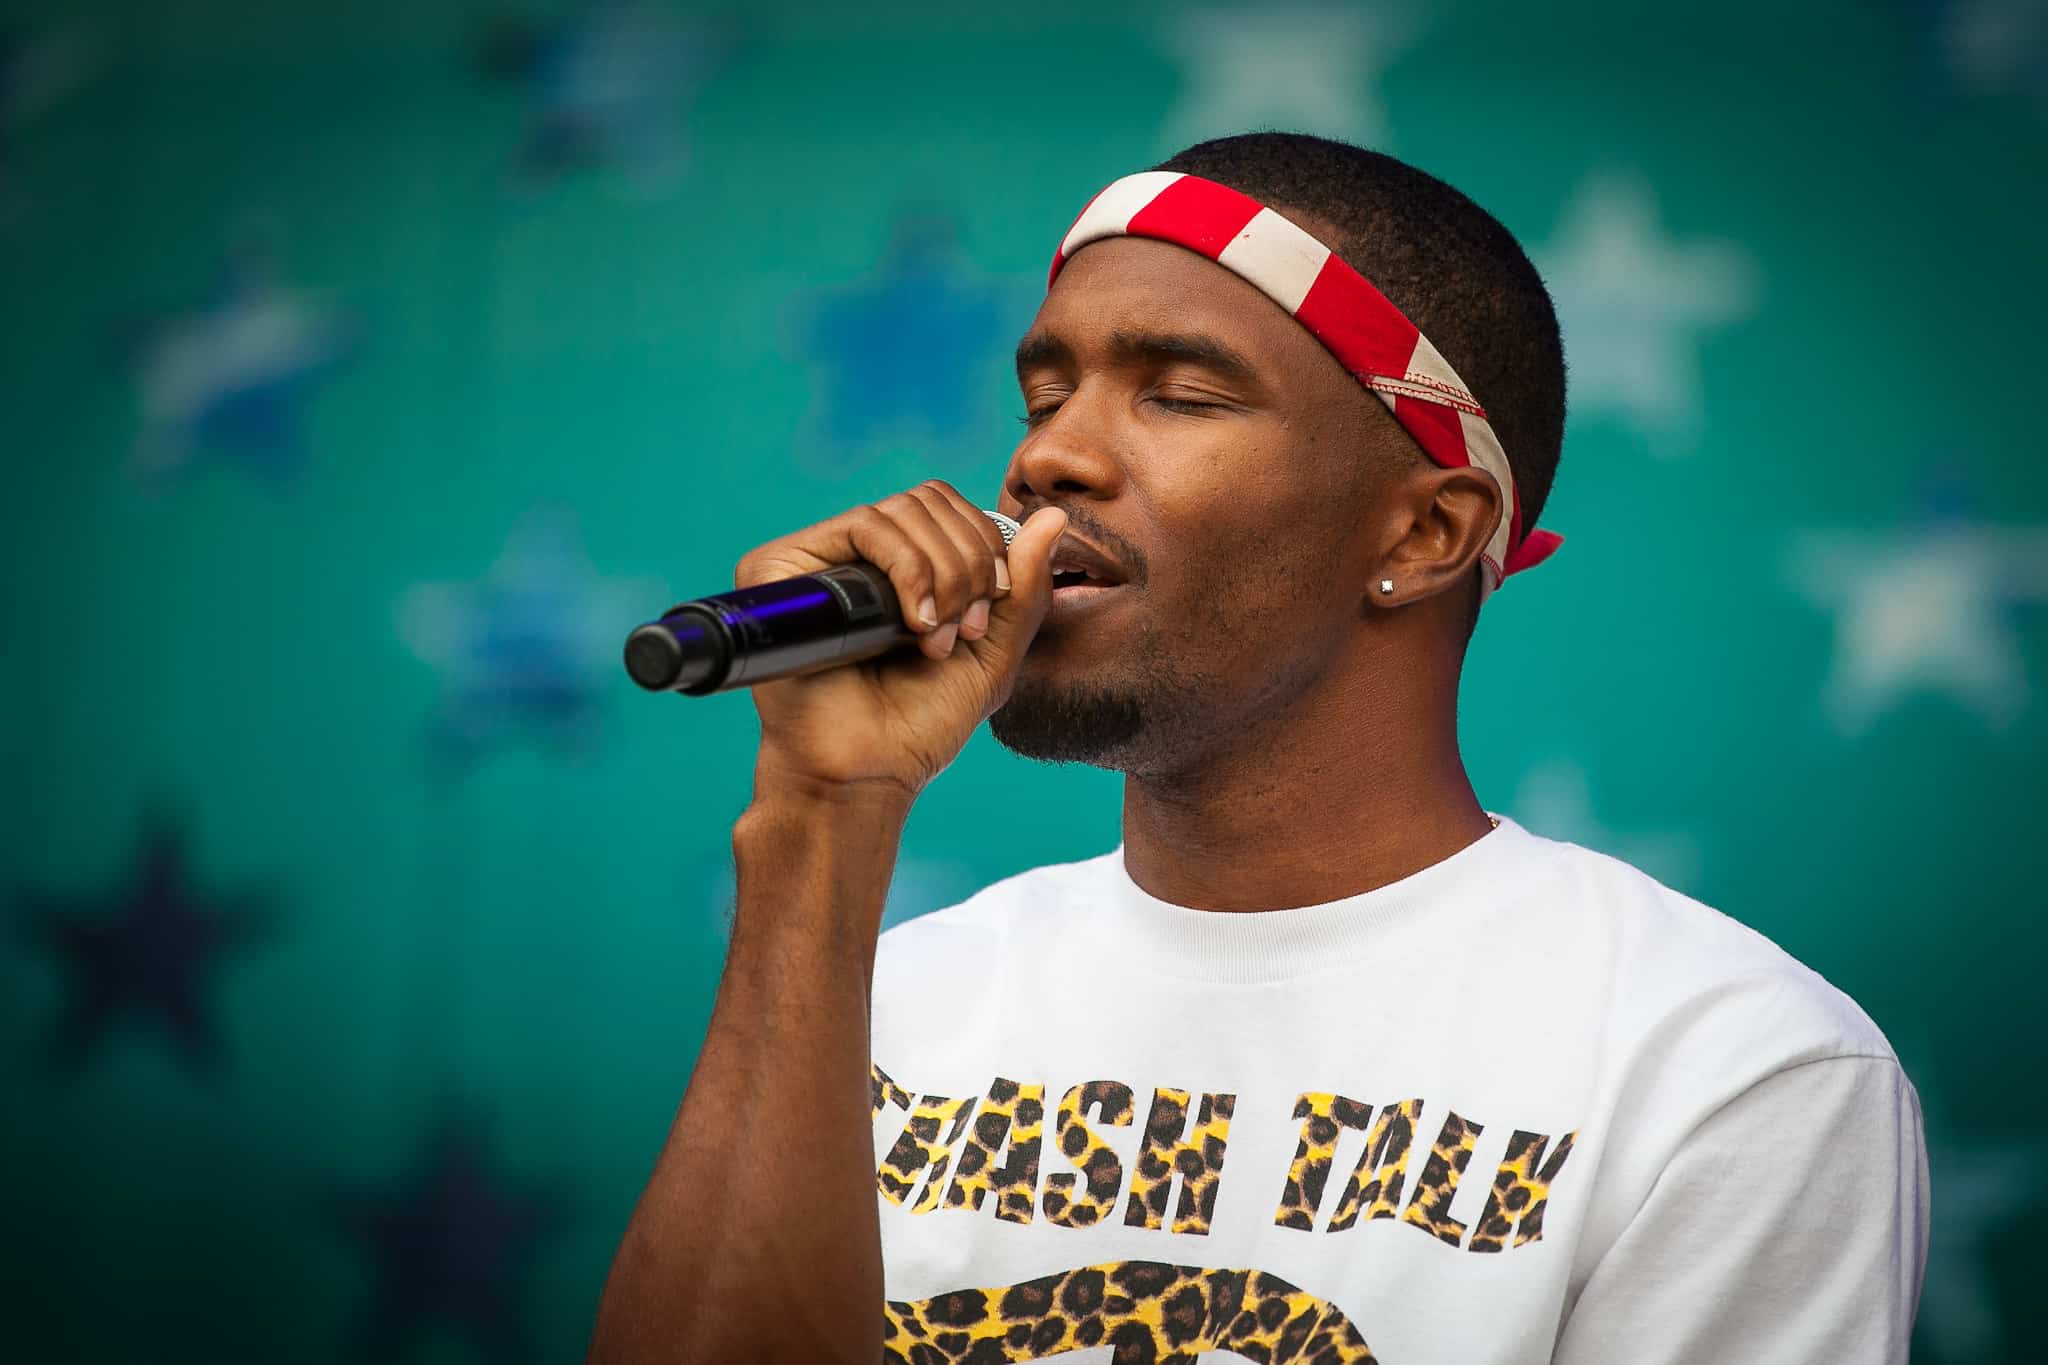 BREAKING: Frank Ocean replaced by Blink-182 for Sunday headlining set at Coachella 2023